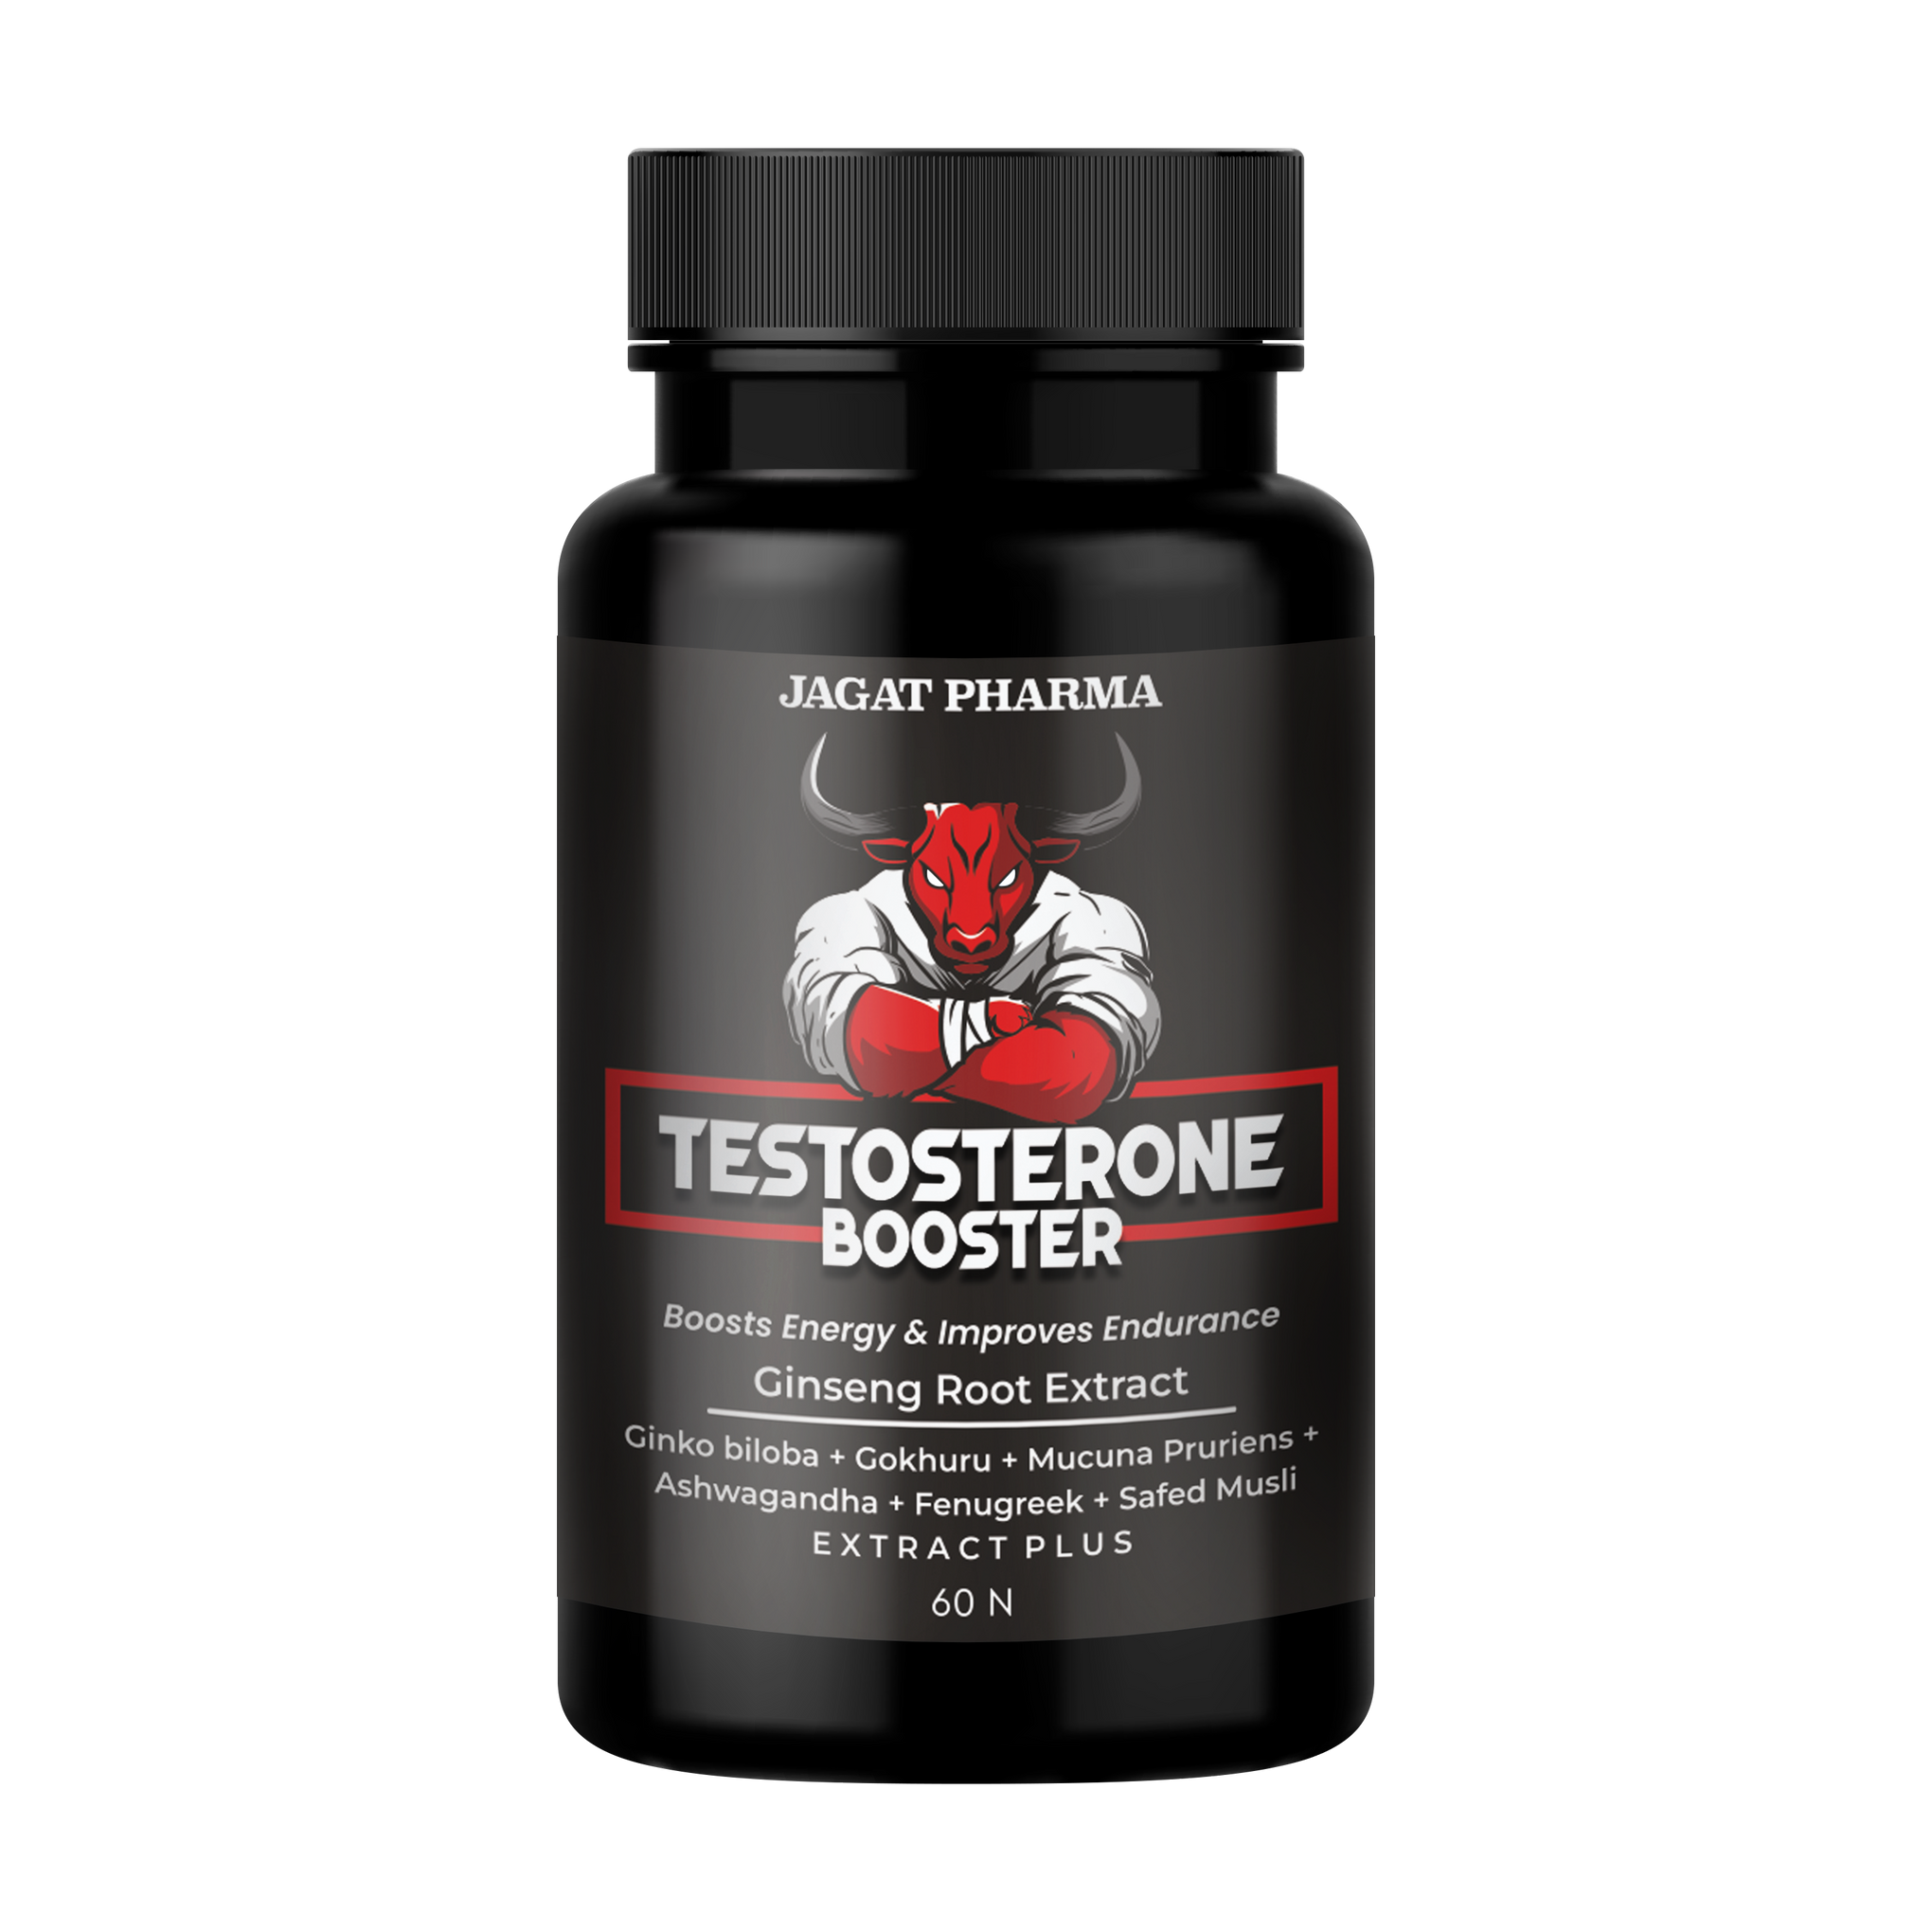 Testosterone Booster- 60 Caps Muscle Mass Gainer and Stamina Booster